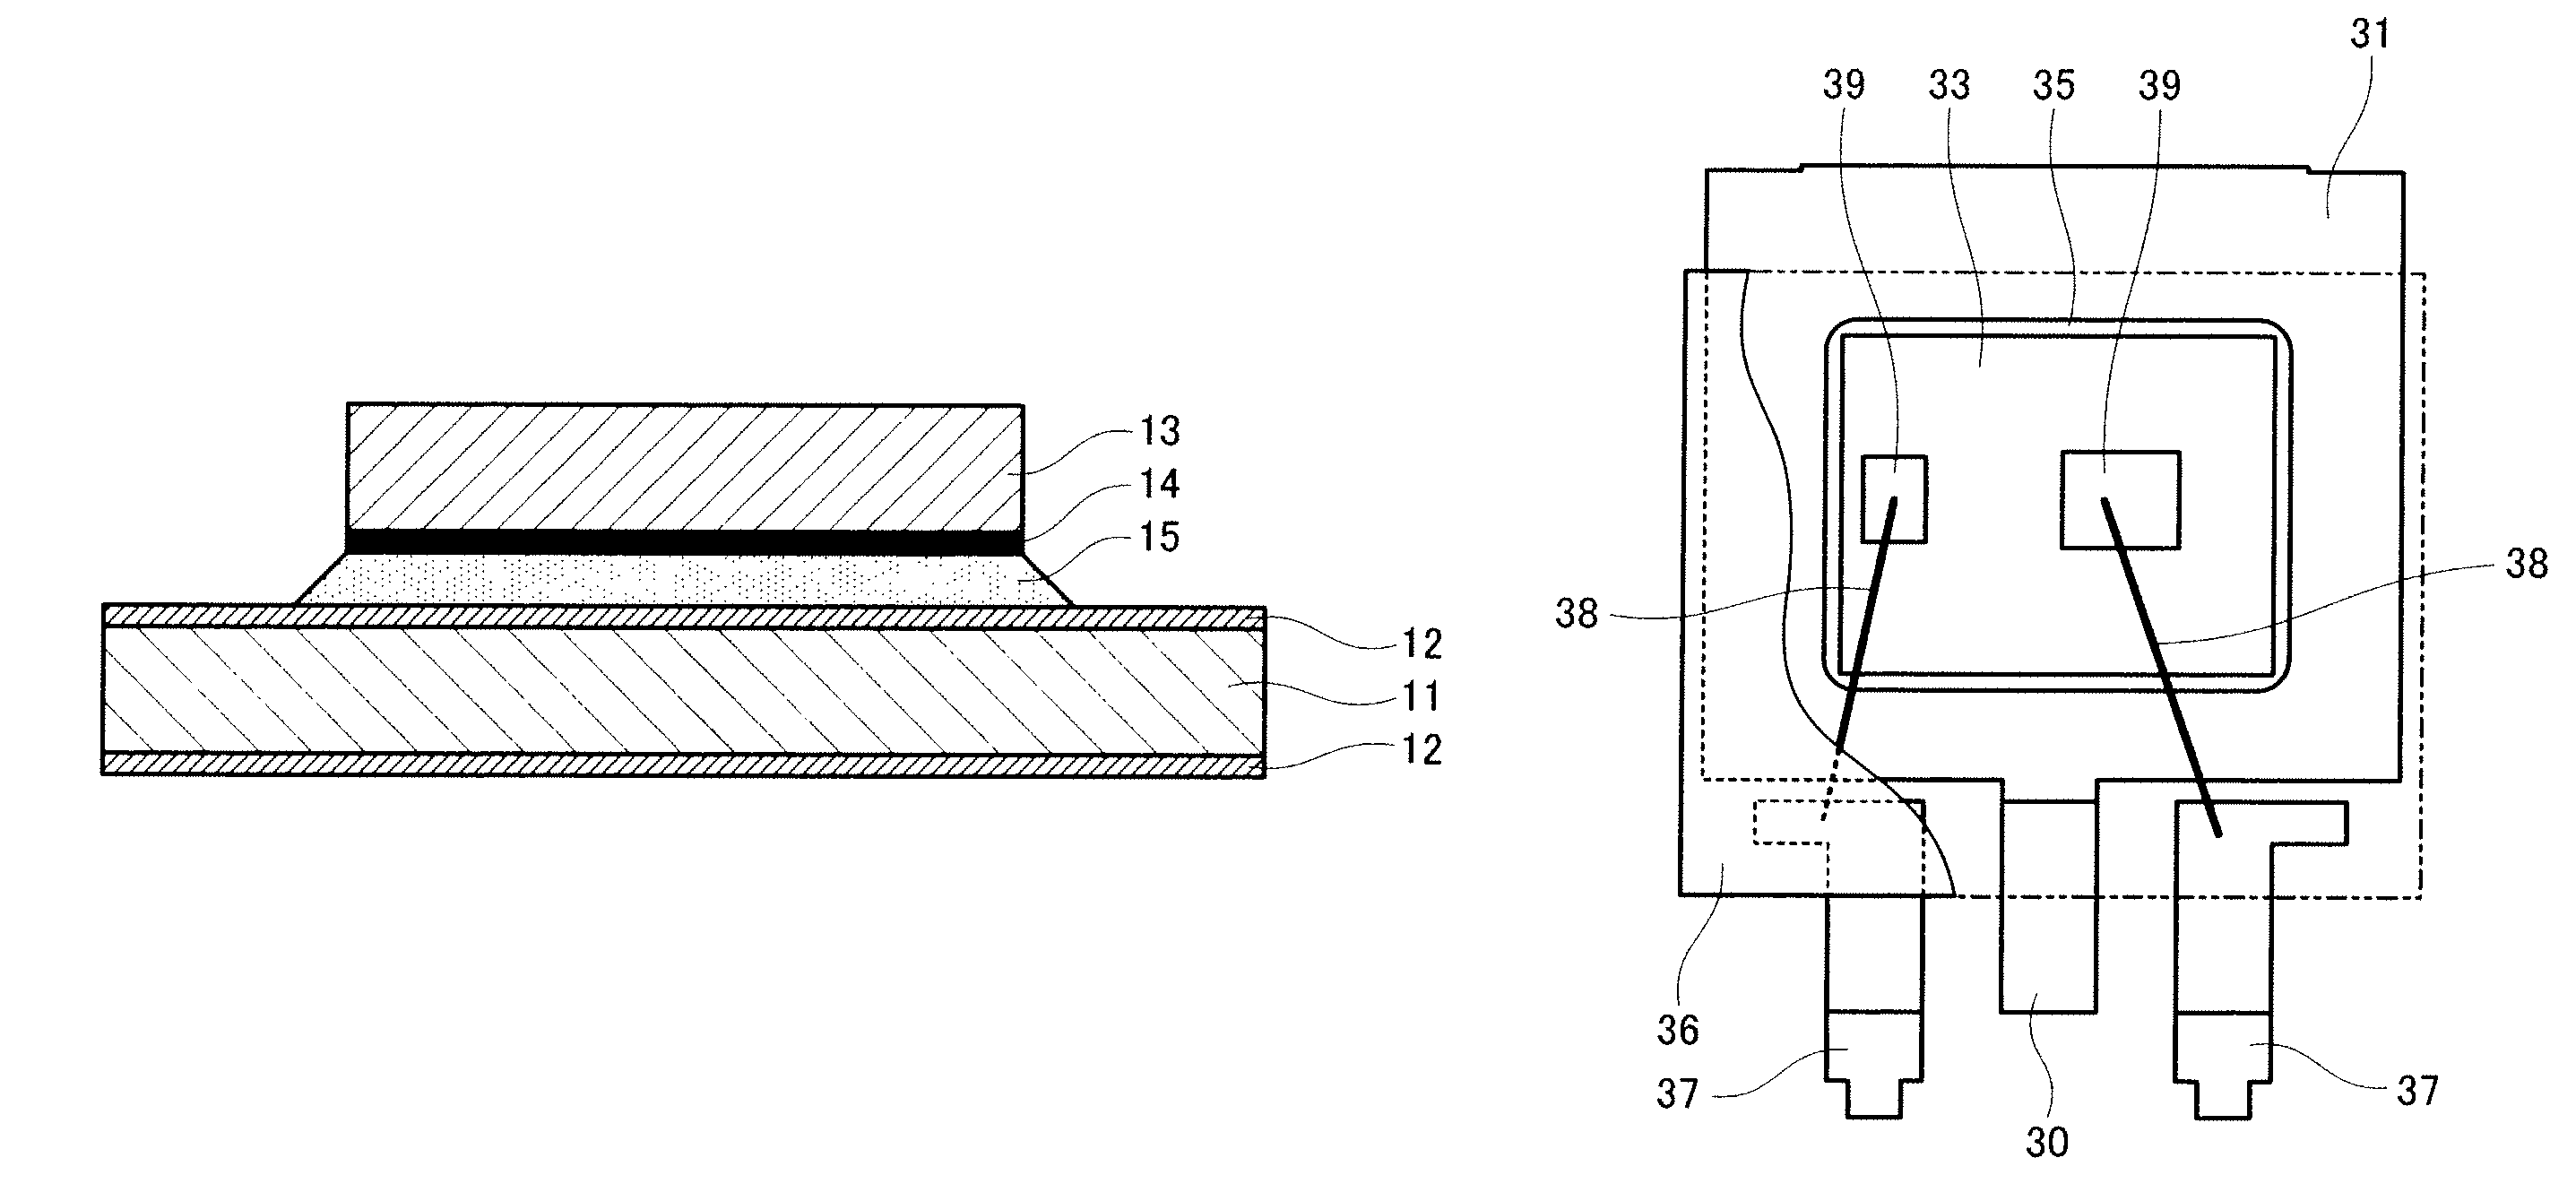 Semiconductor device using lead-free solder as die bonding material and die bonding material not containing lead